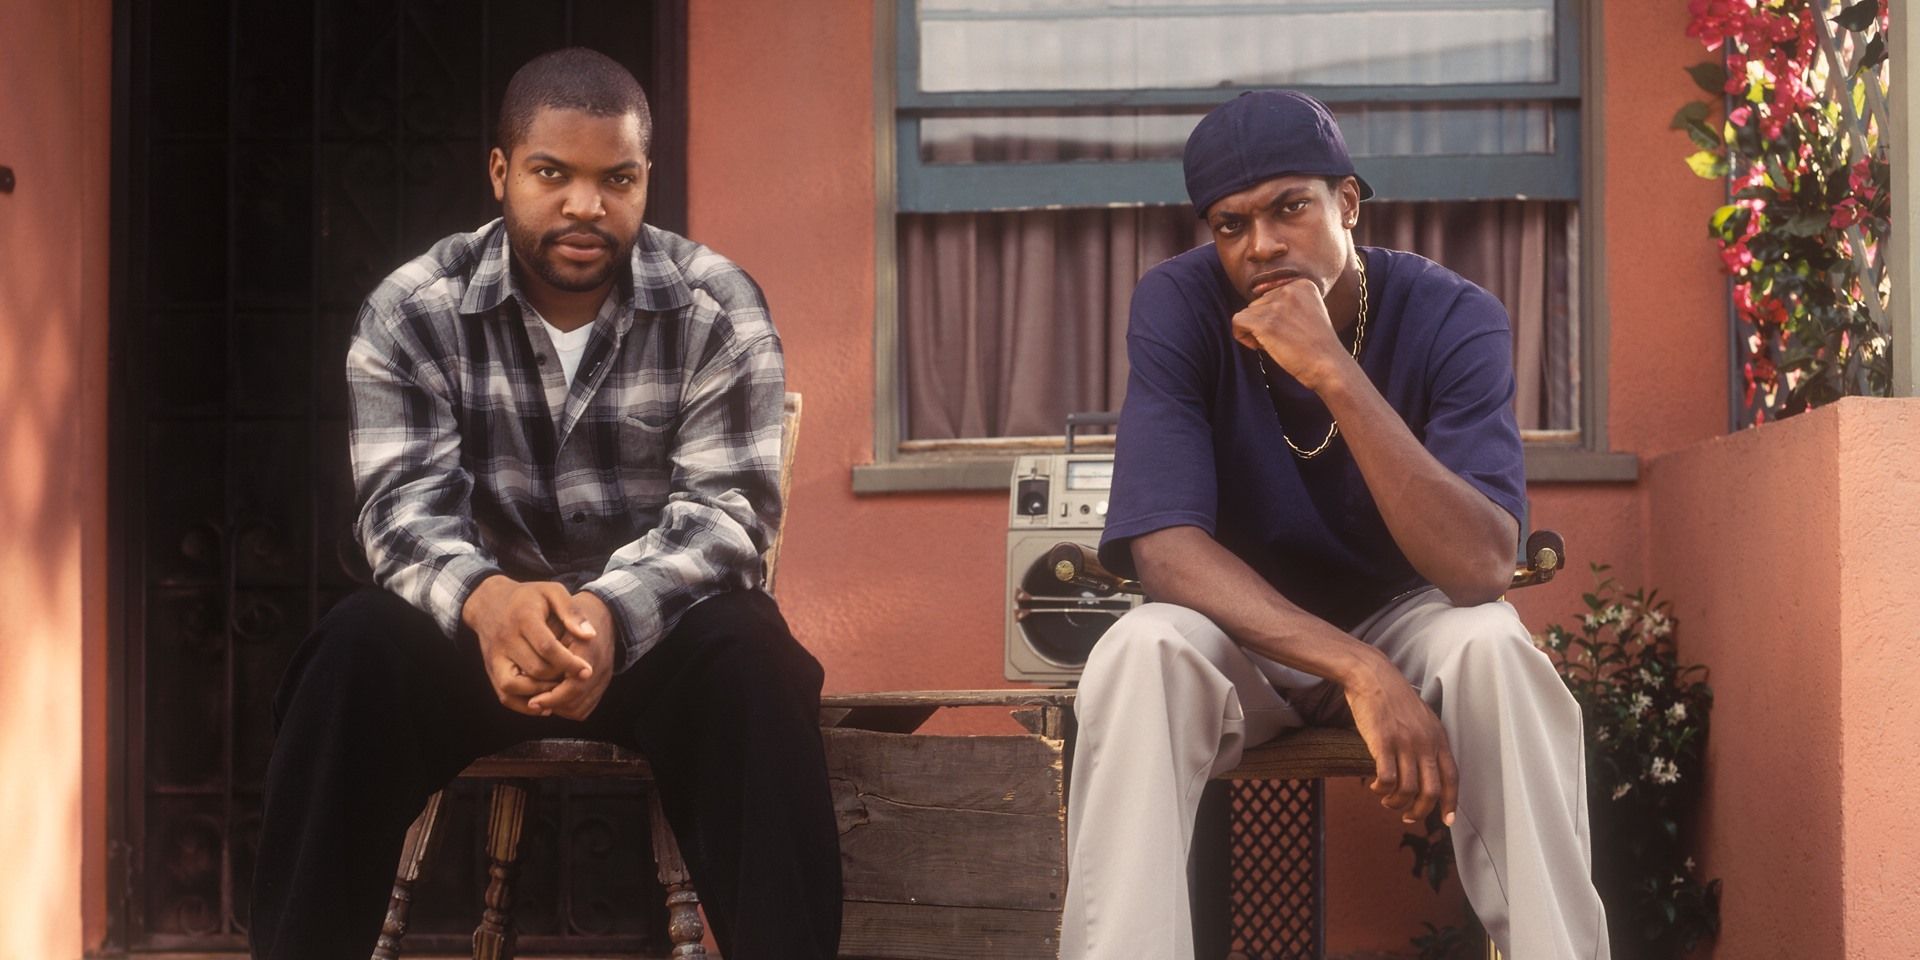 Friday Ice Cube and Chris Tucker